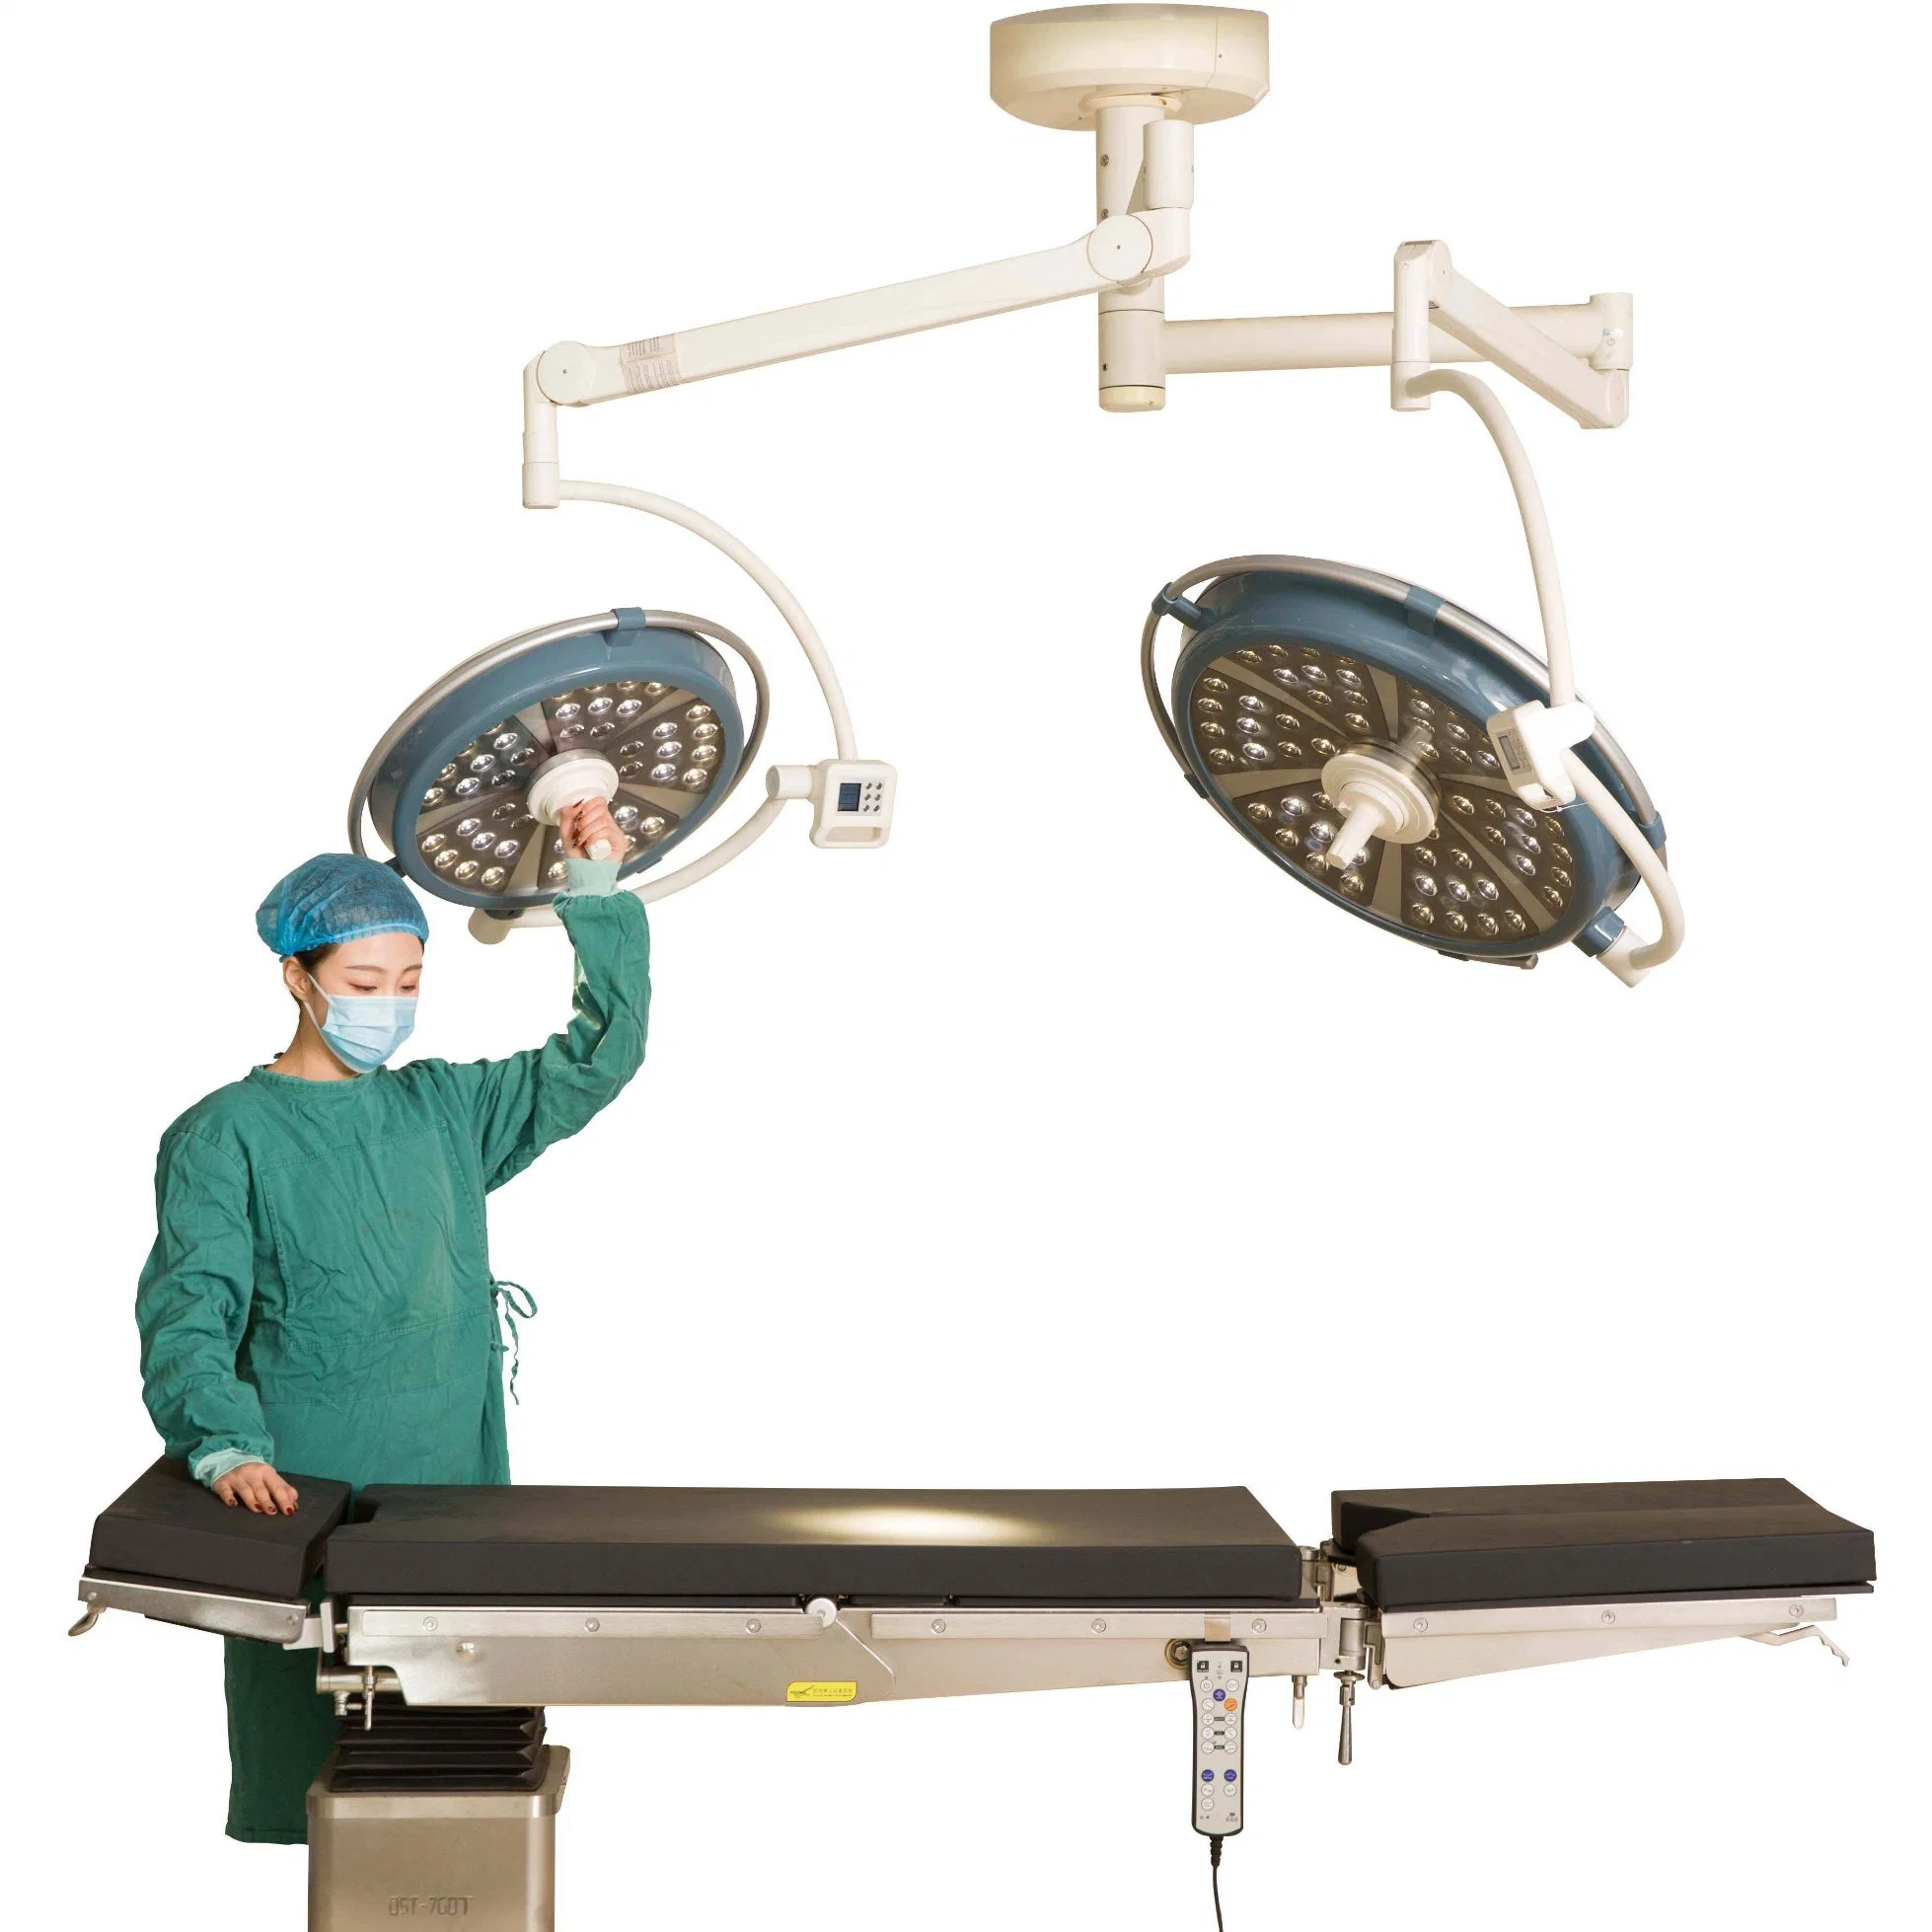 Low Price Ceiling Mounted LED Light Surgical Operating Lamp in Operation Theatre Room Light